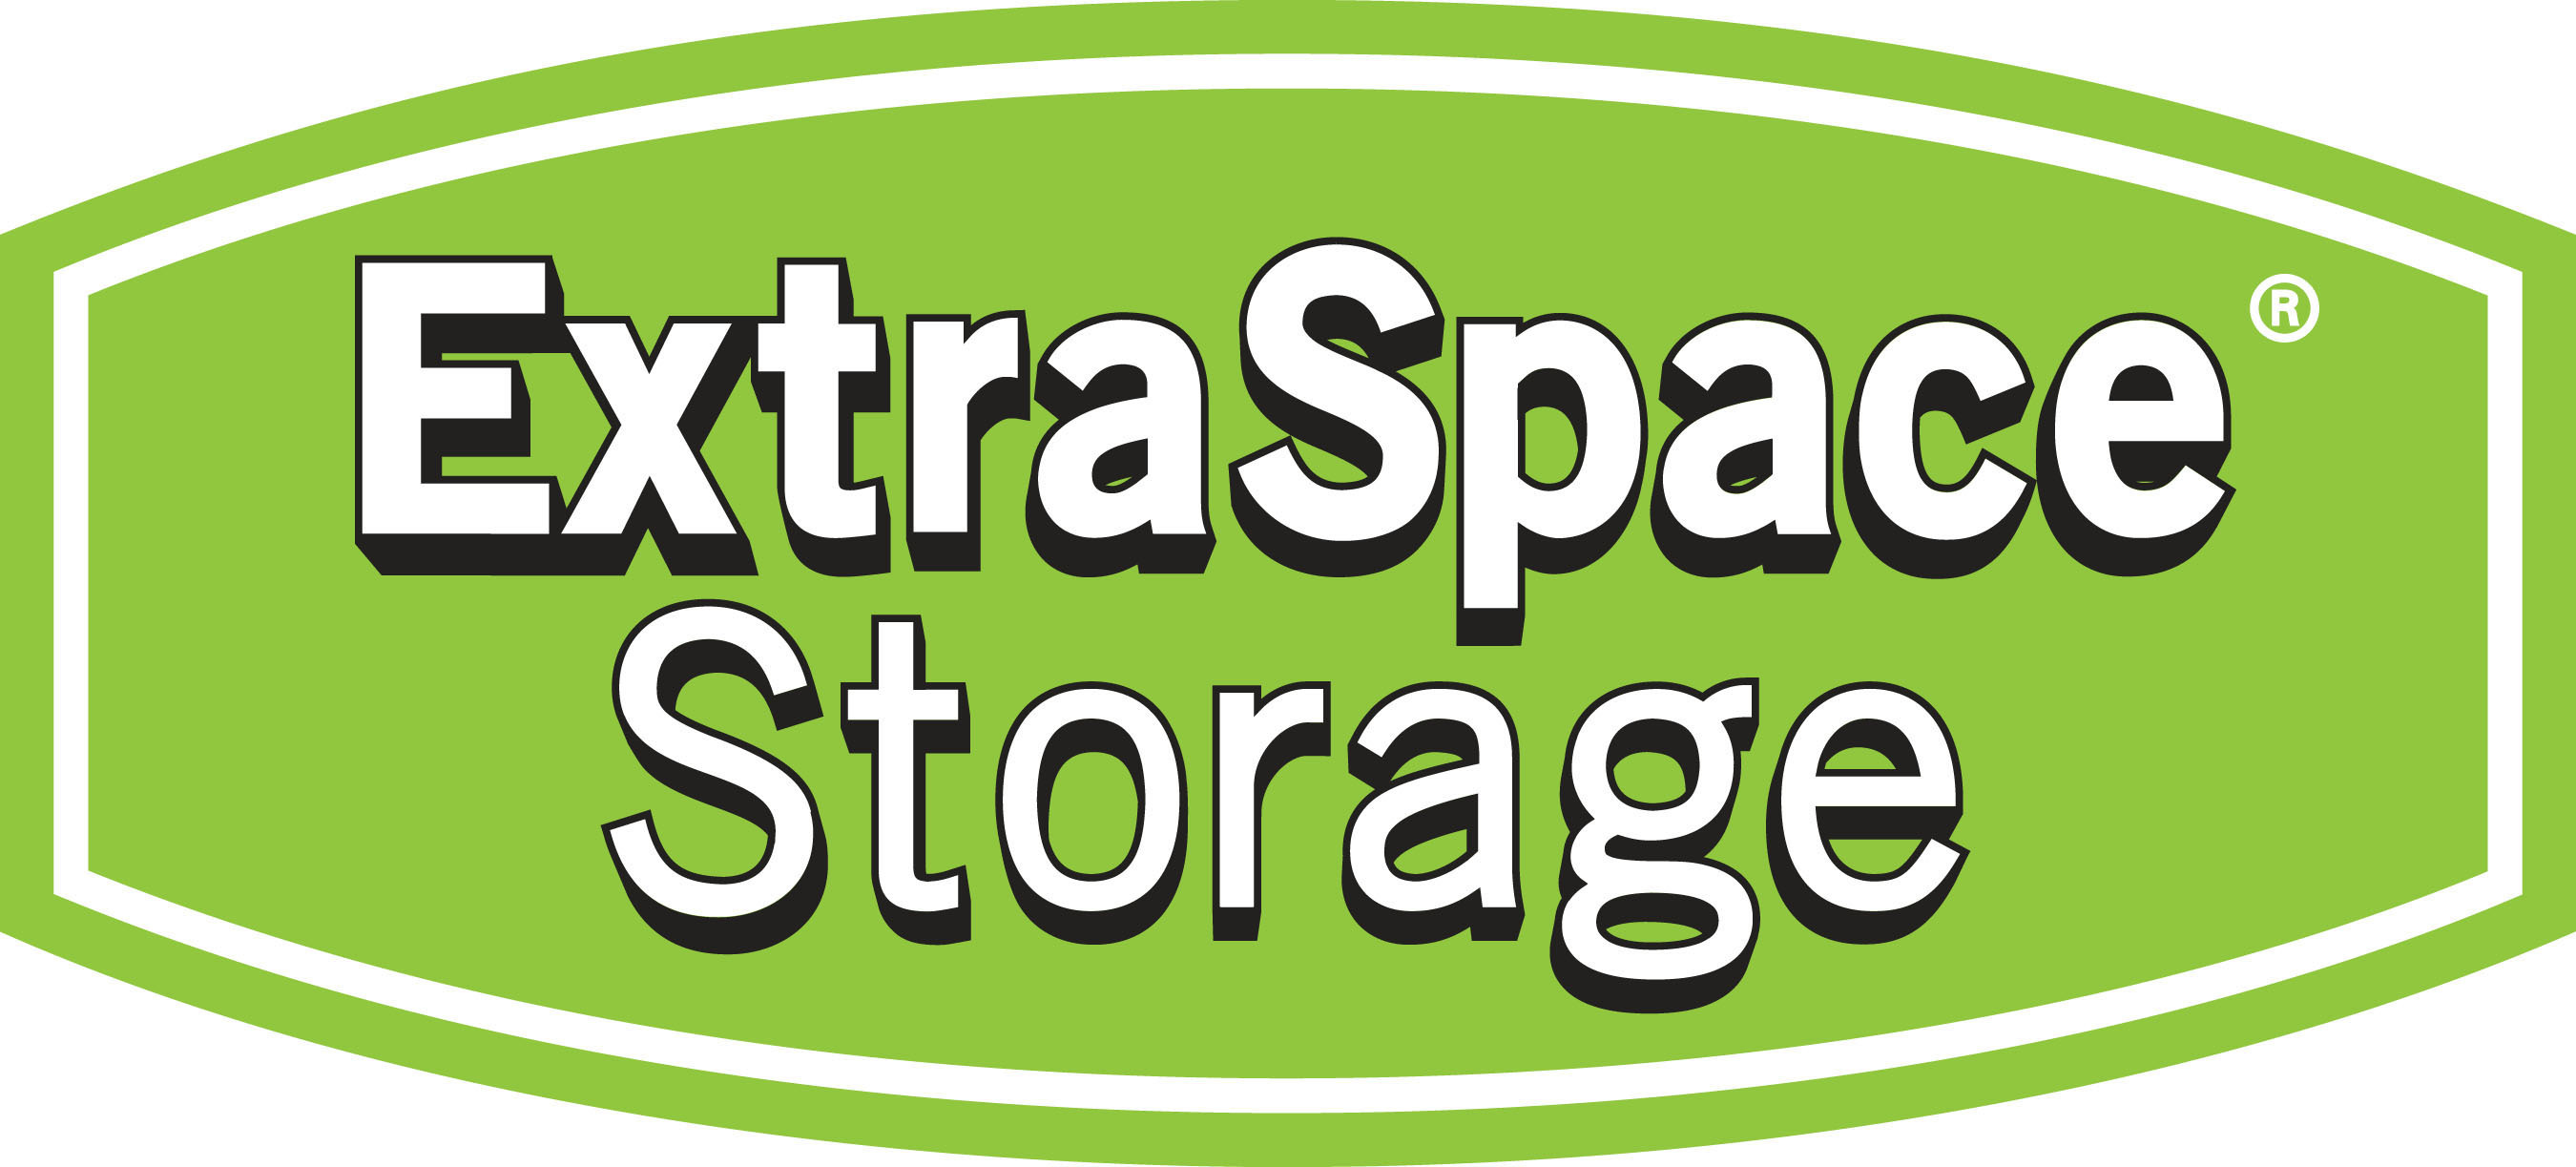 extra storage space logo inc self reit exr spring ways closes smartstop acquisition declutter company truck rental customers welcome